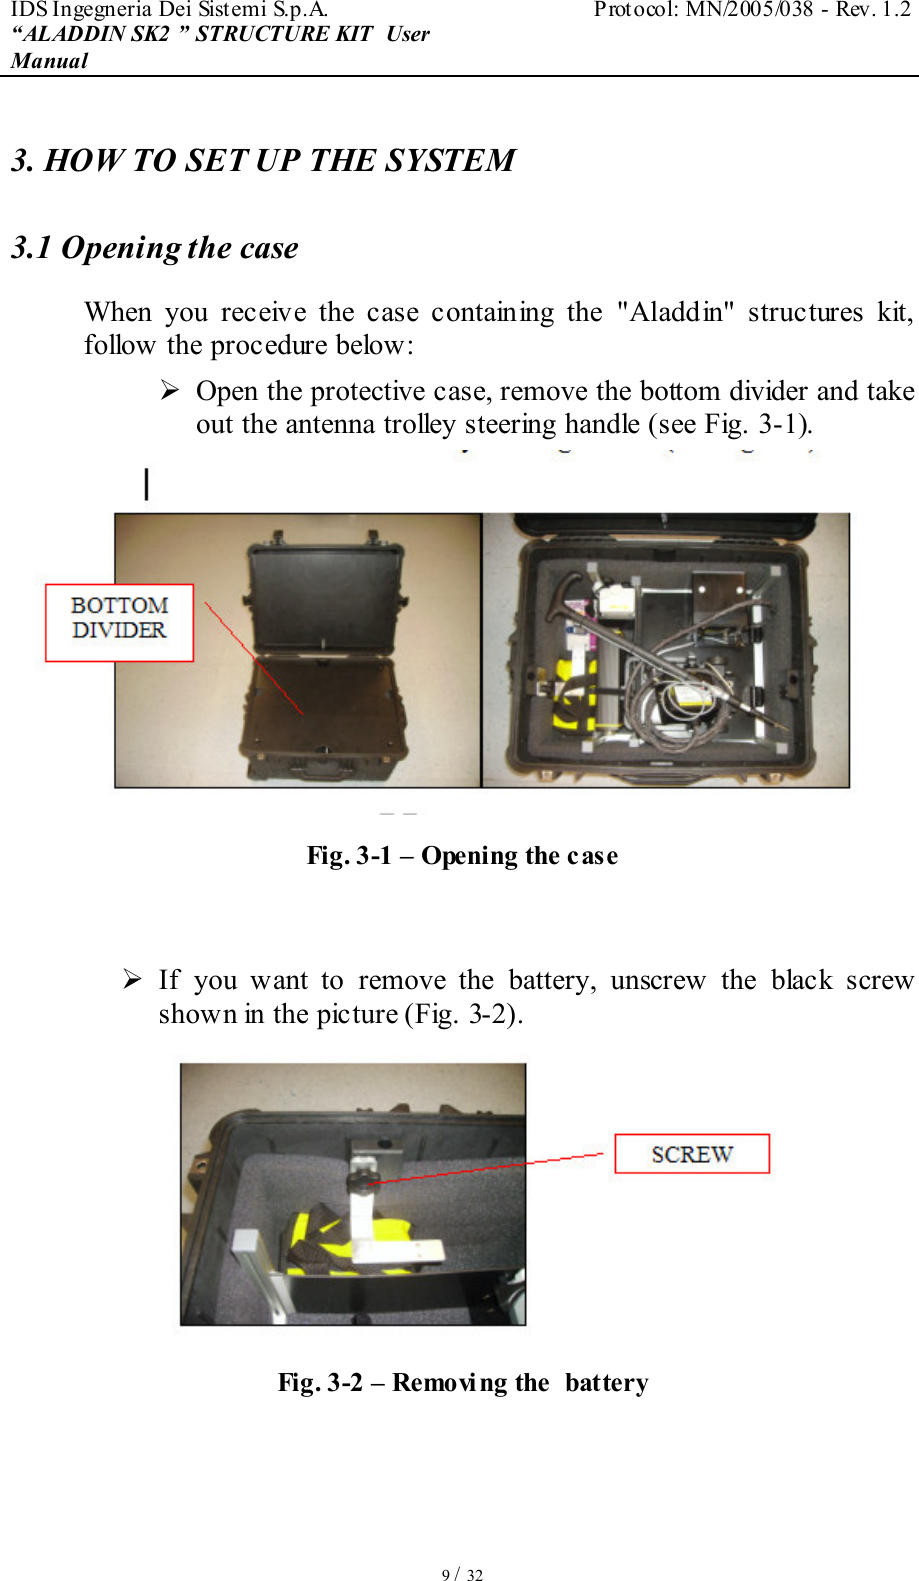 IDS Ingegneria Dei Sistemi S.p.A.  Protocol: MN/2005/038 - Rev. 1.2 “ALADDIN SK2 ” STRUCTURE KIT  User Manual   9 / 32 3. HOW TO SET UP THE SYSTEM 3.1 Opening the case  When  you  receive  the  case  containing  the  &quot;Aladdin&quot;  structures  kit, follow the procedure below:   Open the protective case, remove the bottom divider and take out the antenna trolley steering handle (see Fig. 3-1).  Fig. 3-1 – Opening the case    If  you  want  to  remove  the  battery,  unscrew  the  black  screw shown in the picture (Fig. 3-2).  Fig. 3-2 – Removing the  battery  